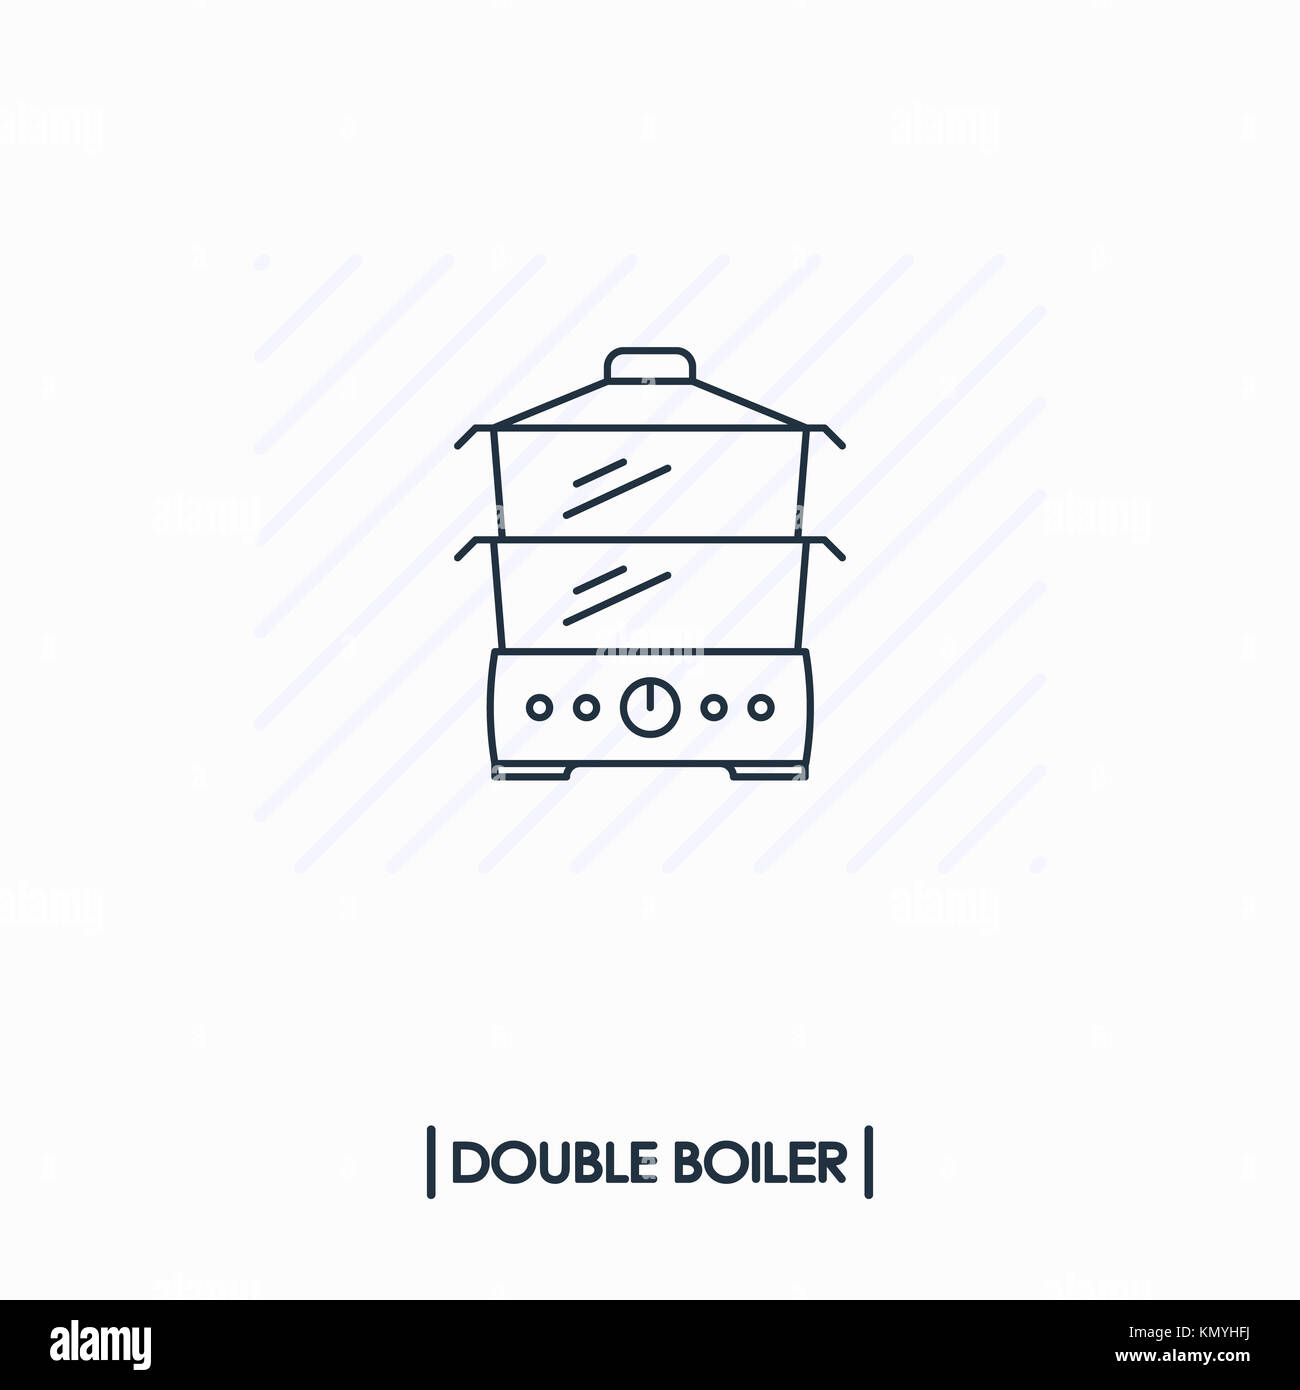 Double boiler outline icon isolated Stock Photo